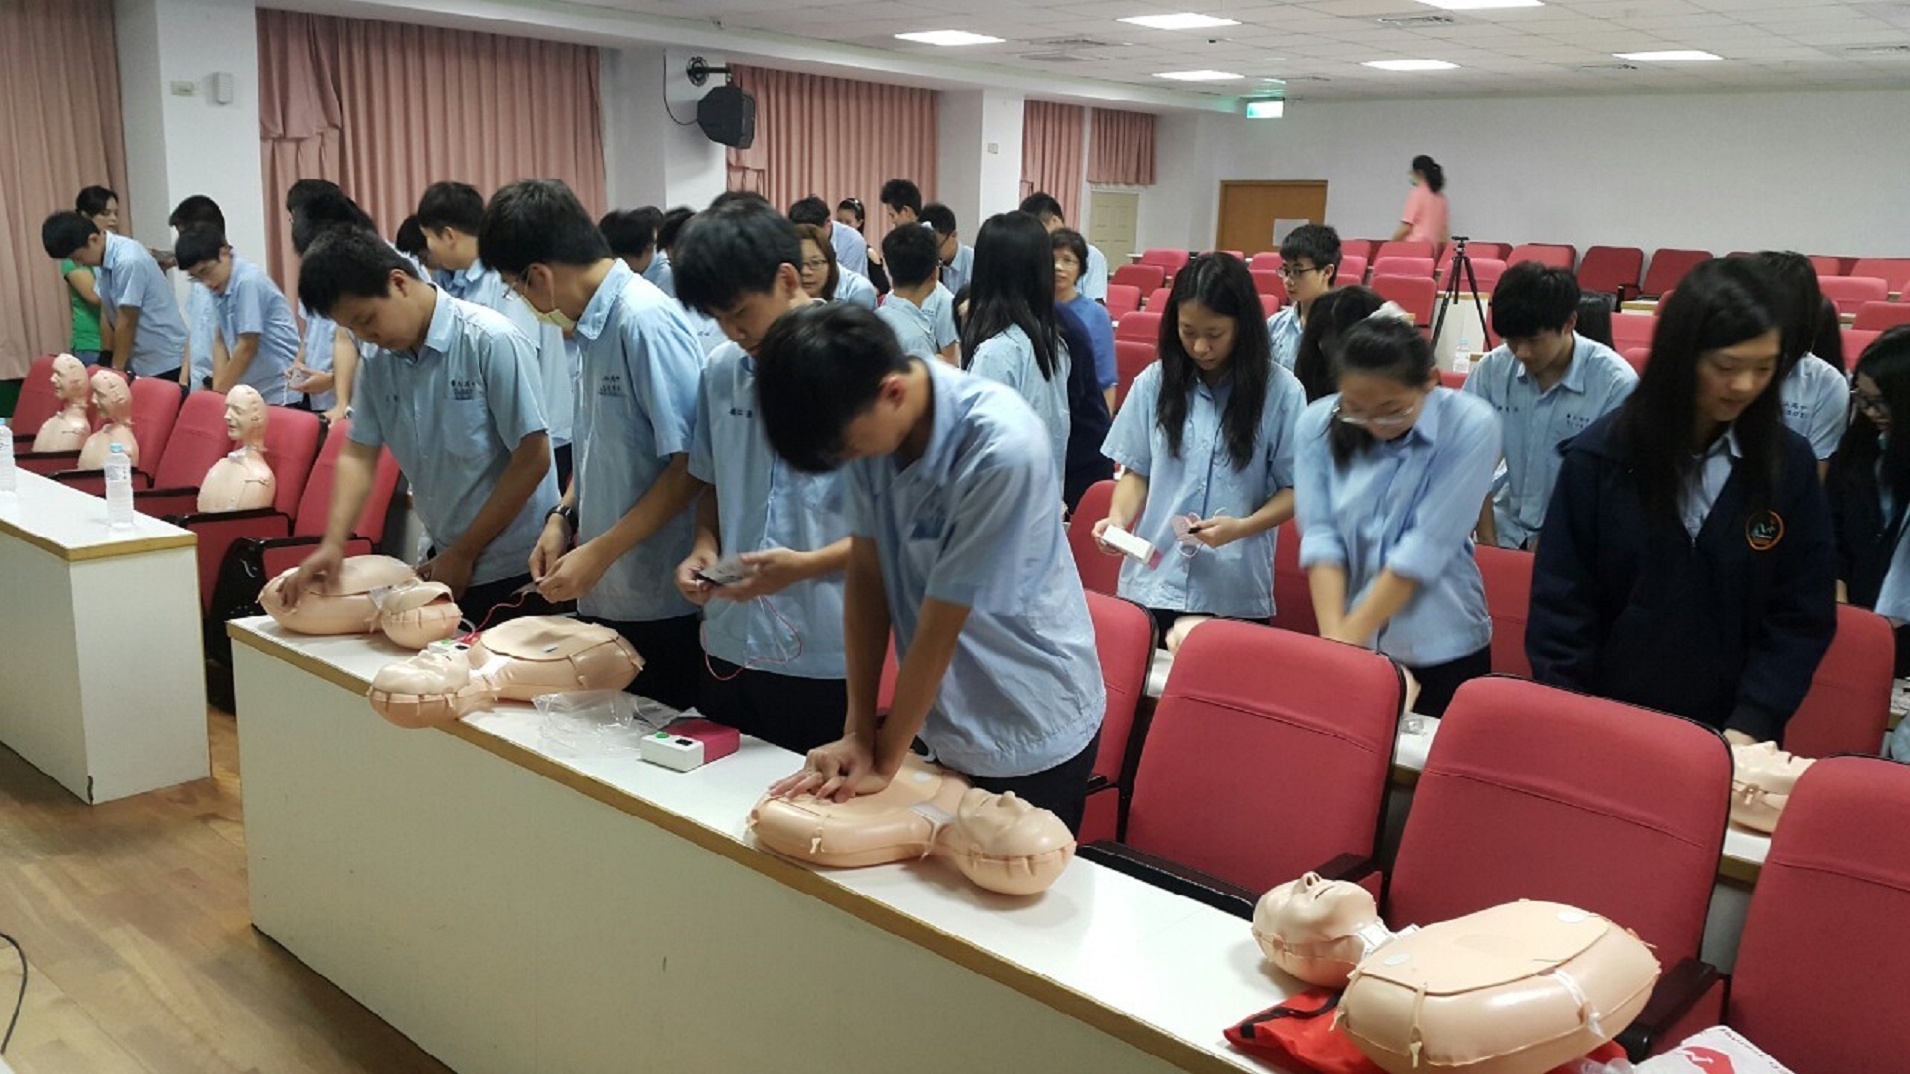 CPR+AED Training in Dongshan High School, 2015